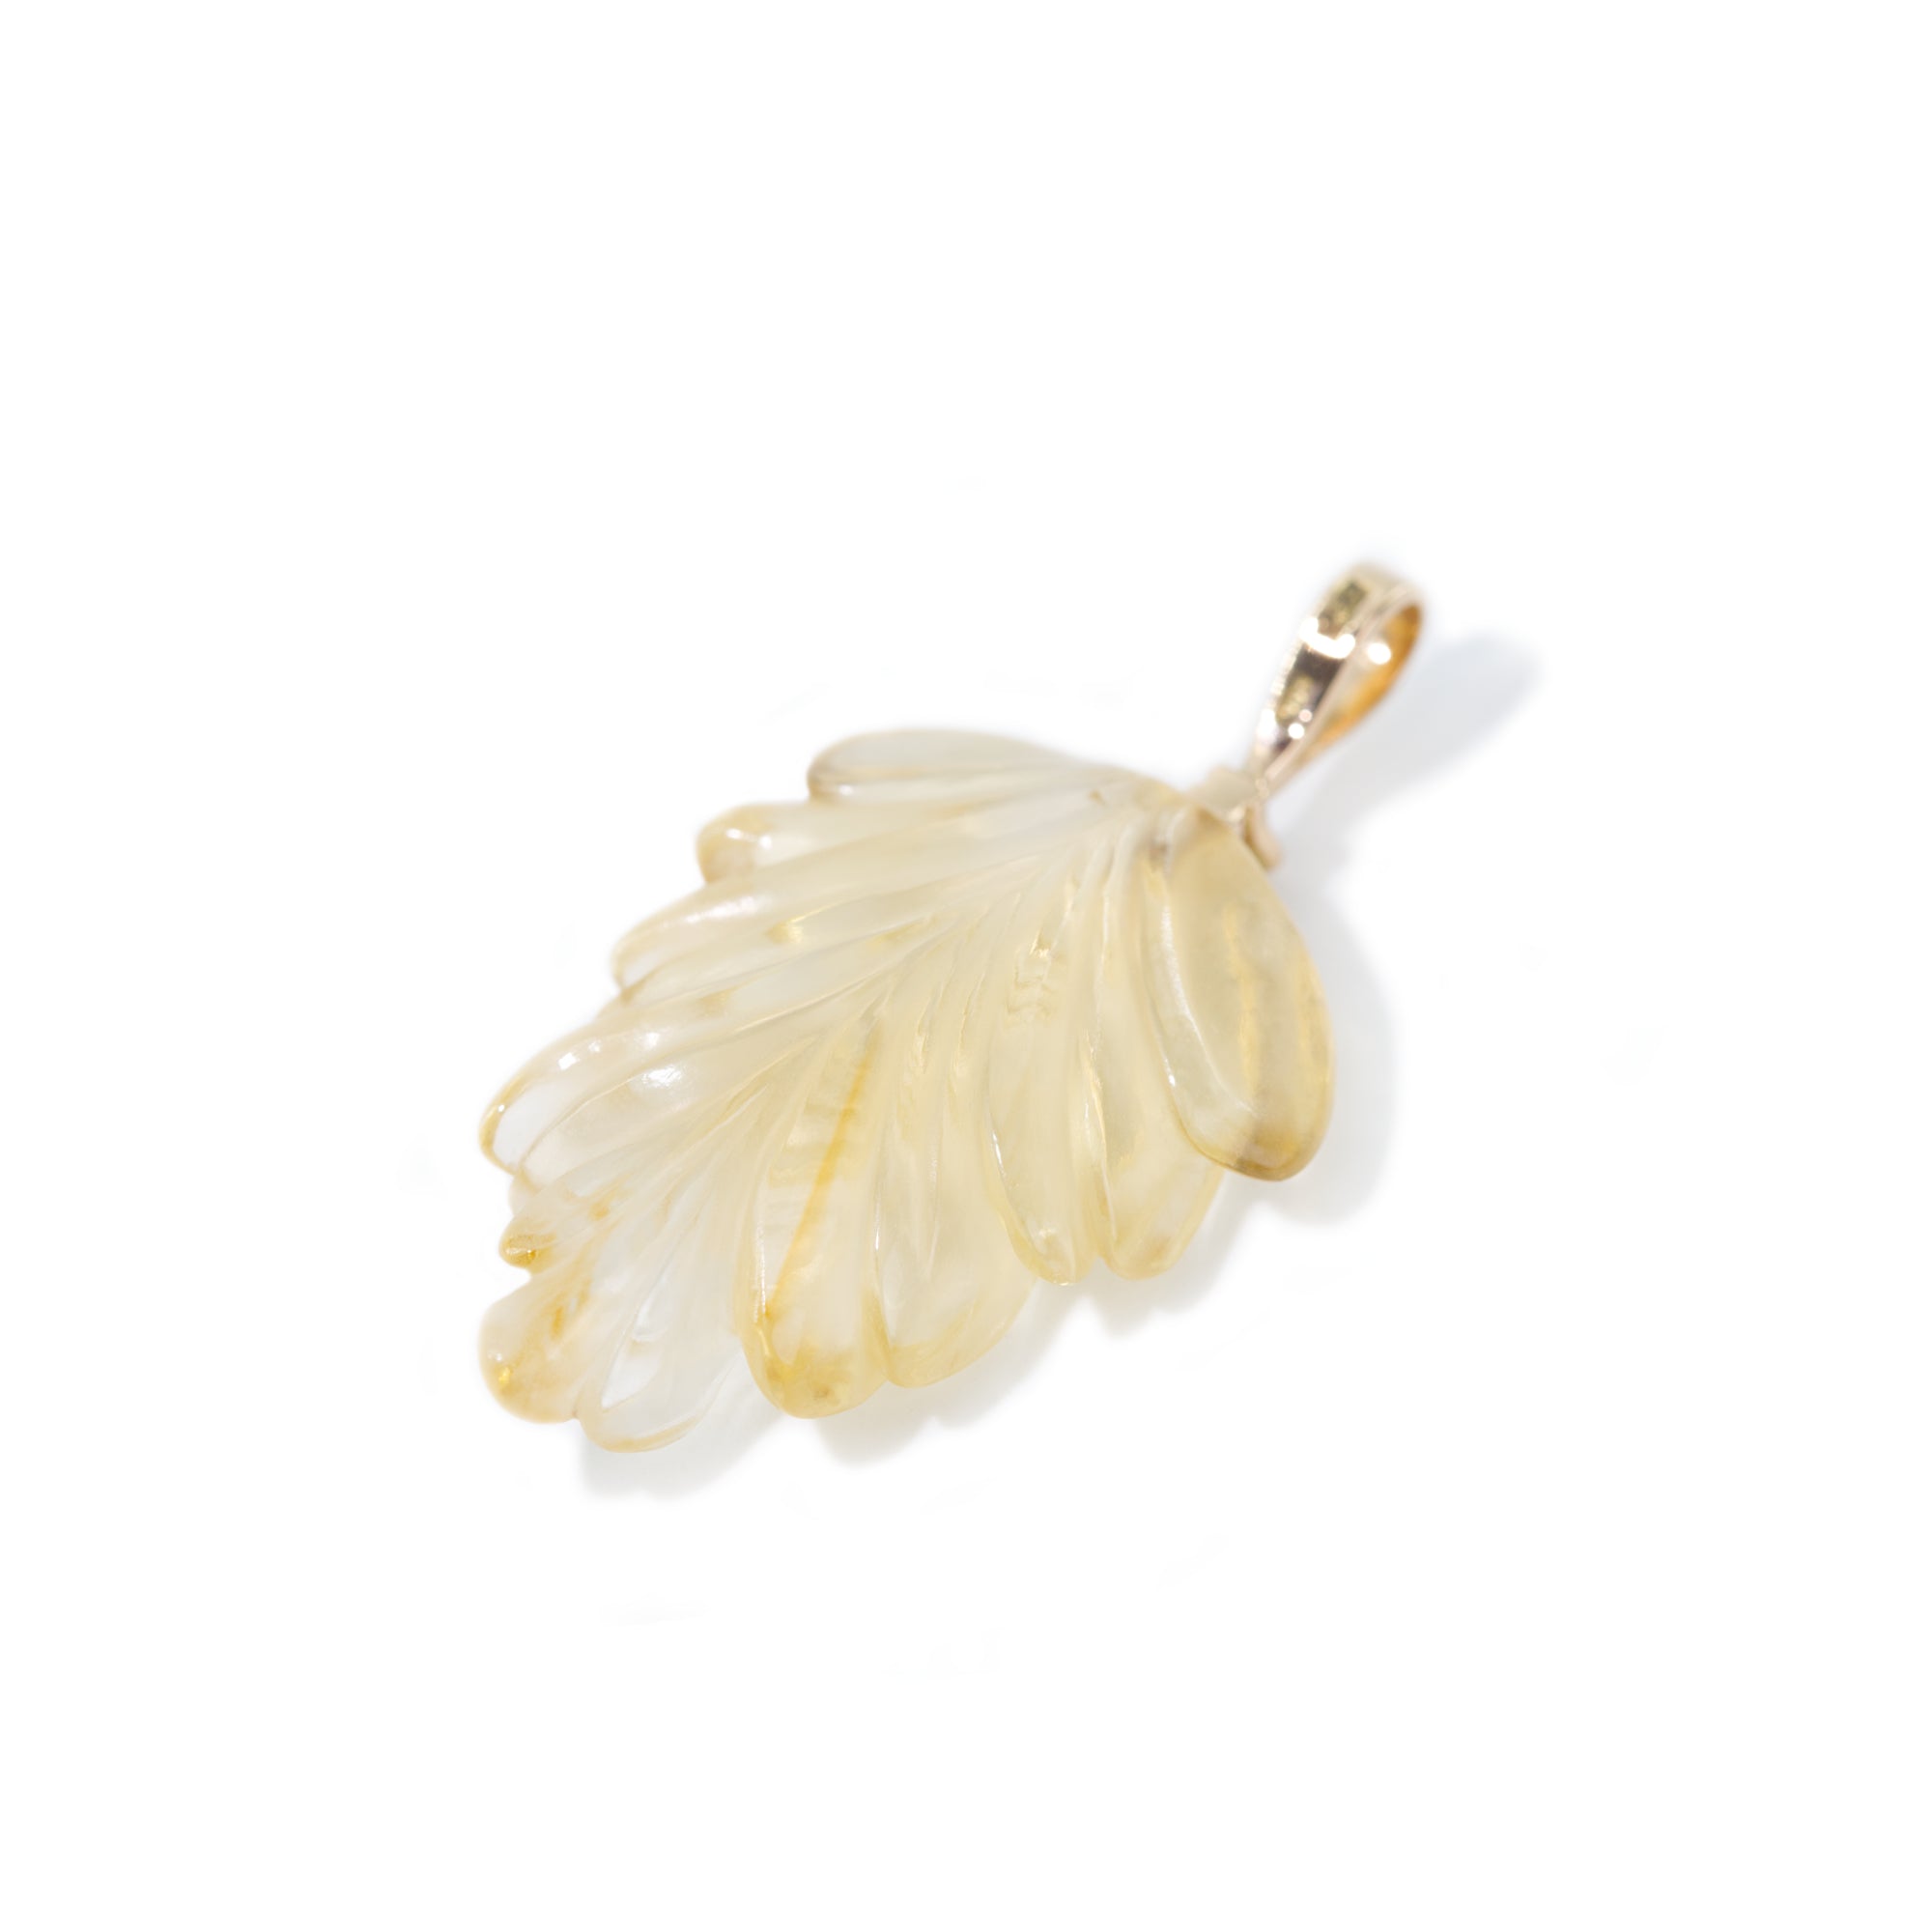 The photo features hand-carved citrine leaf pendant. The pendant is placed on the back side to highlight the detailed work of hand-carving.